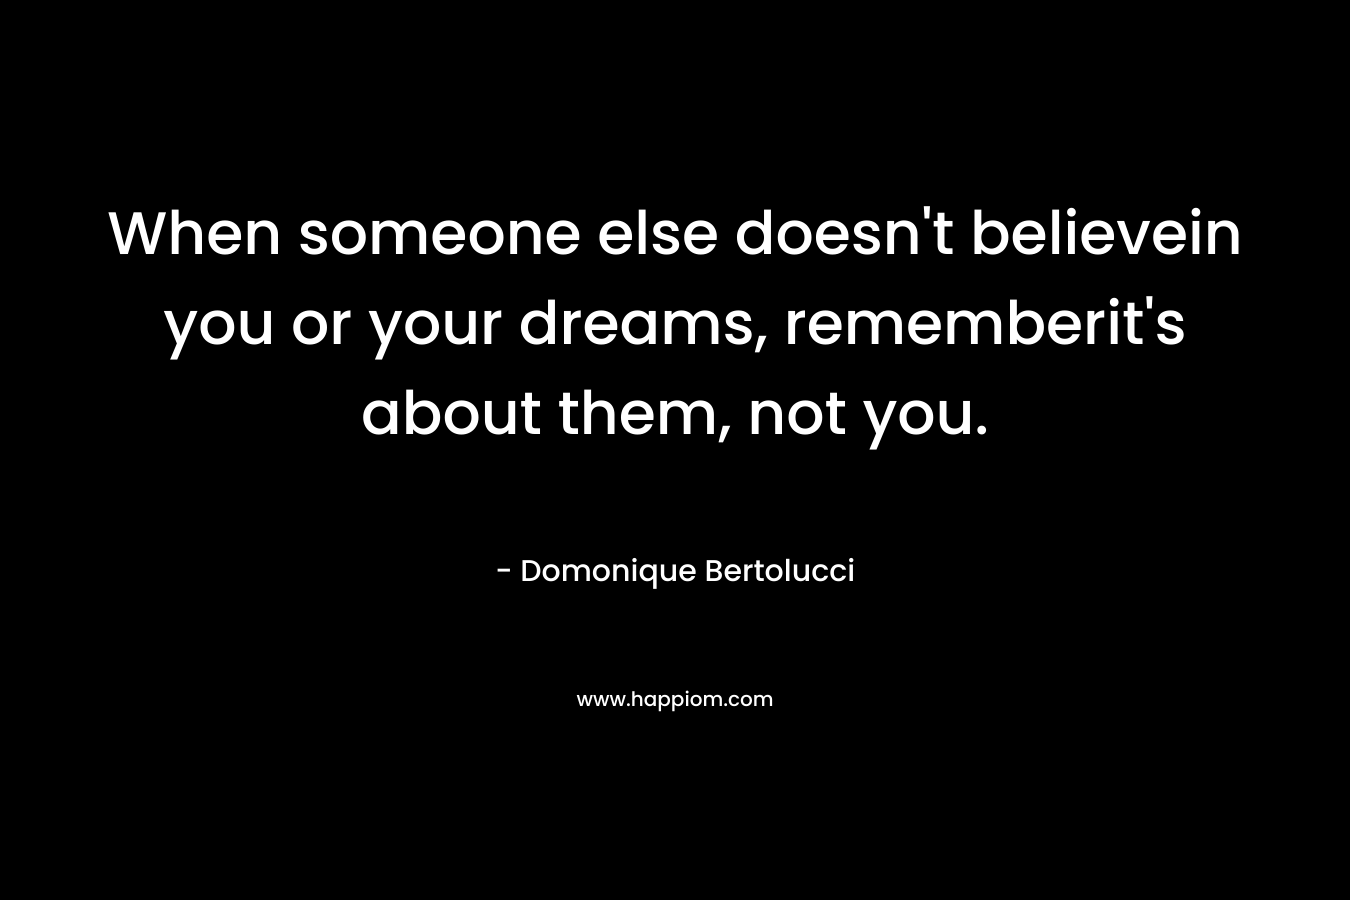 When someone else doesn’t believein you or your dreams, rememberit’s about them, not you. – Domonique Bertolucci